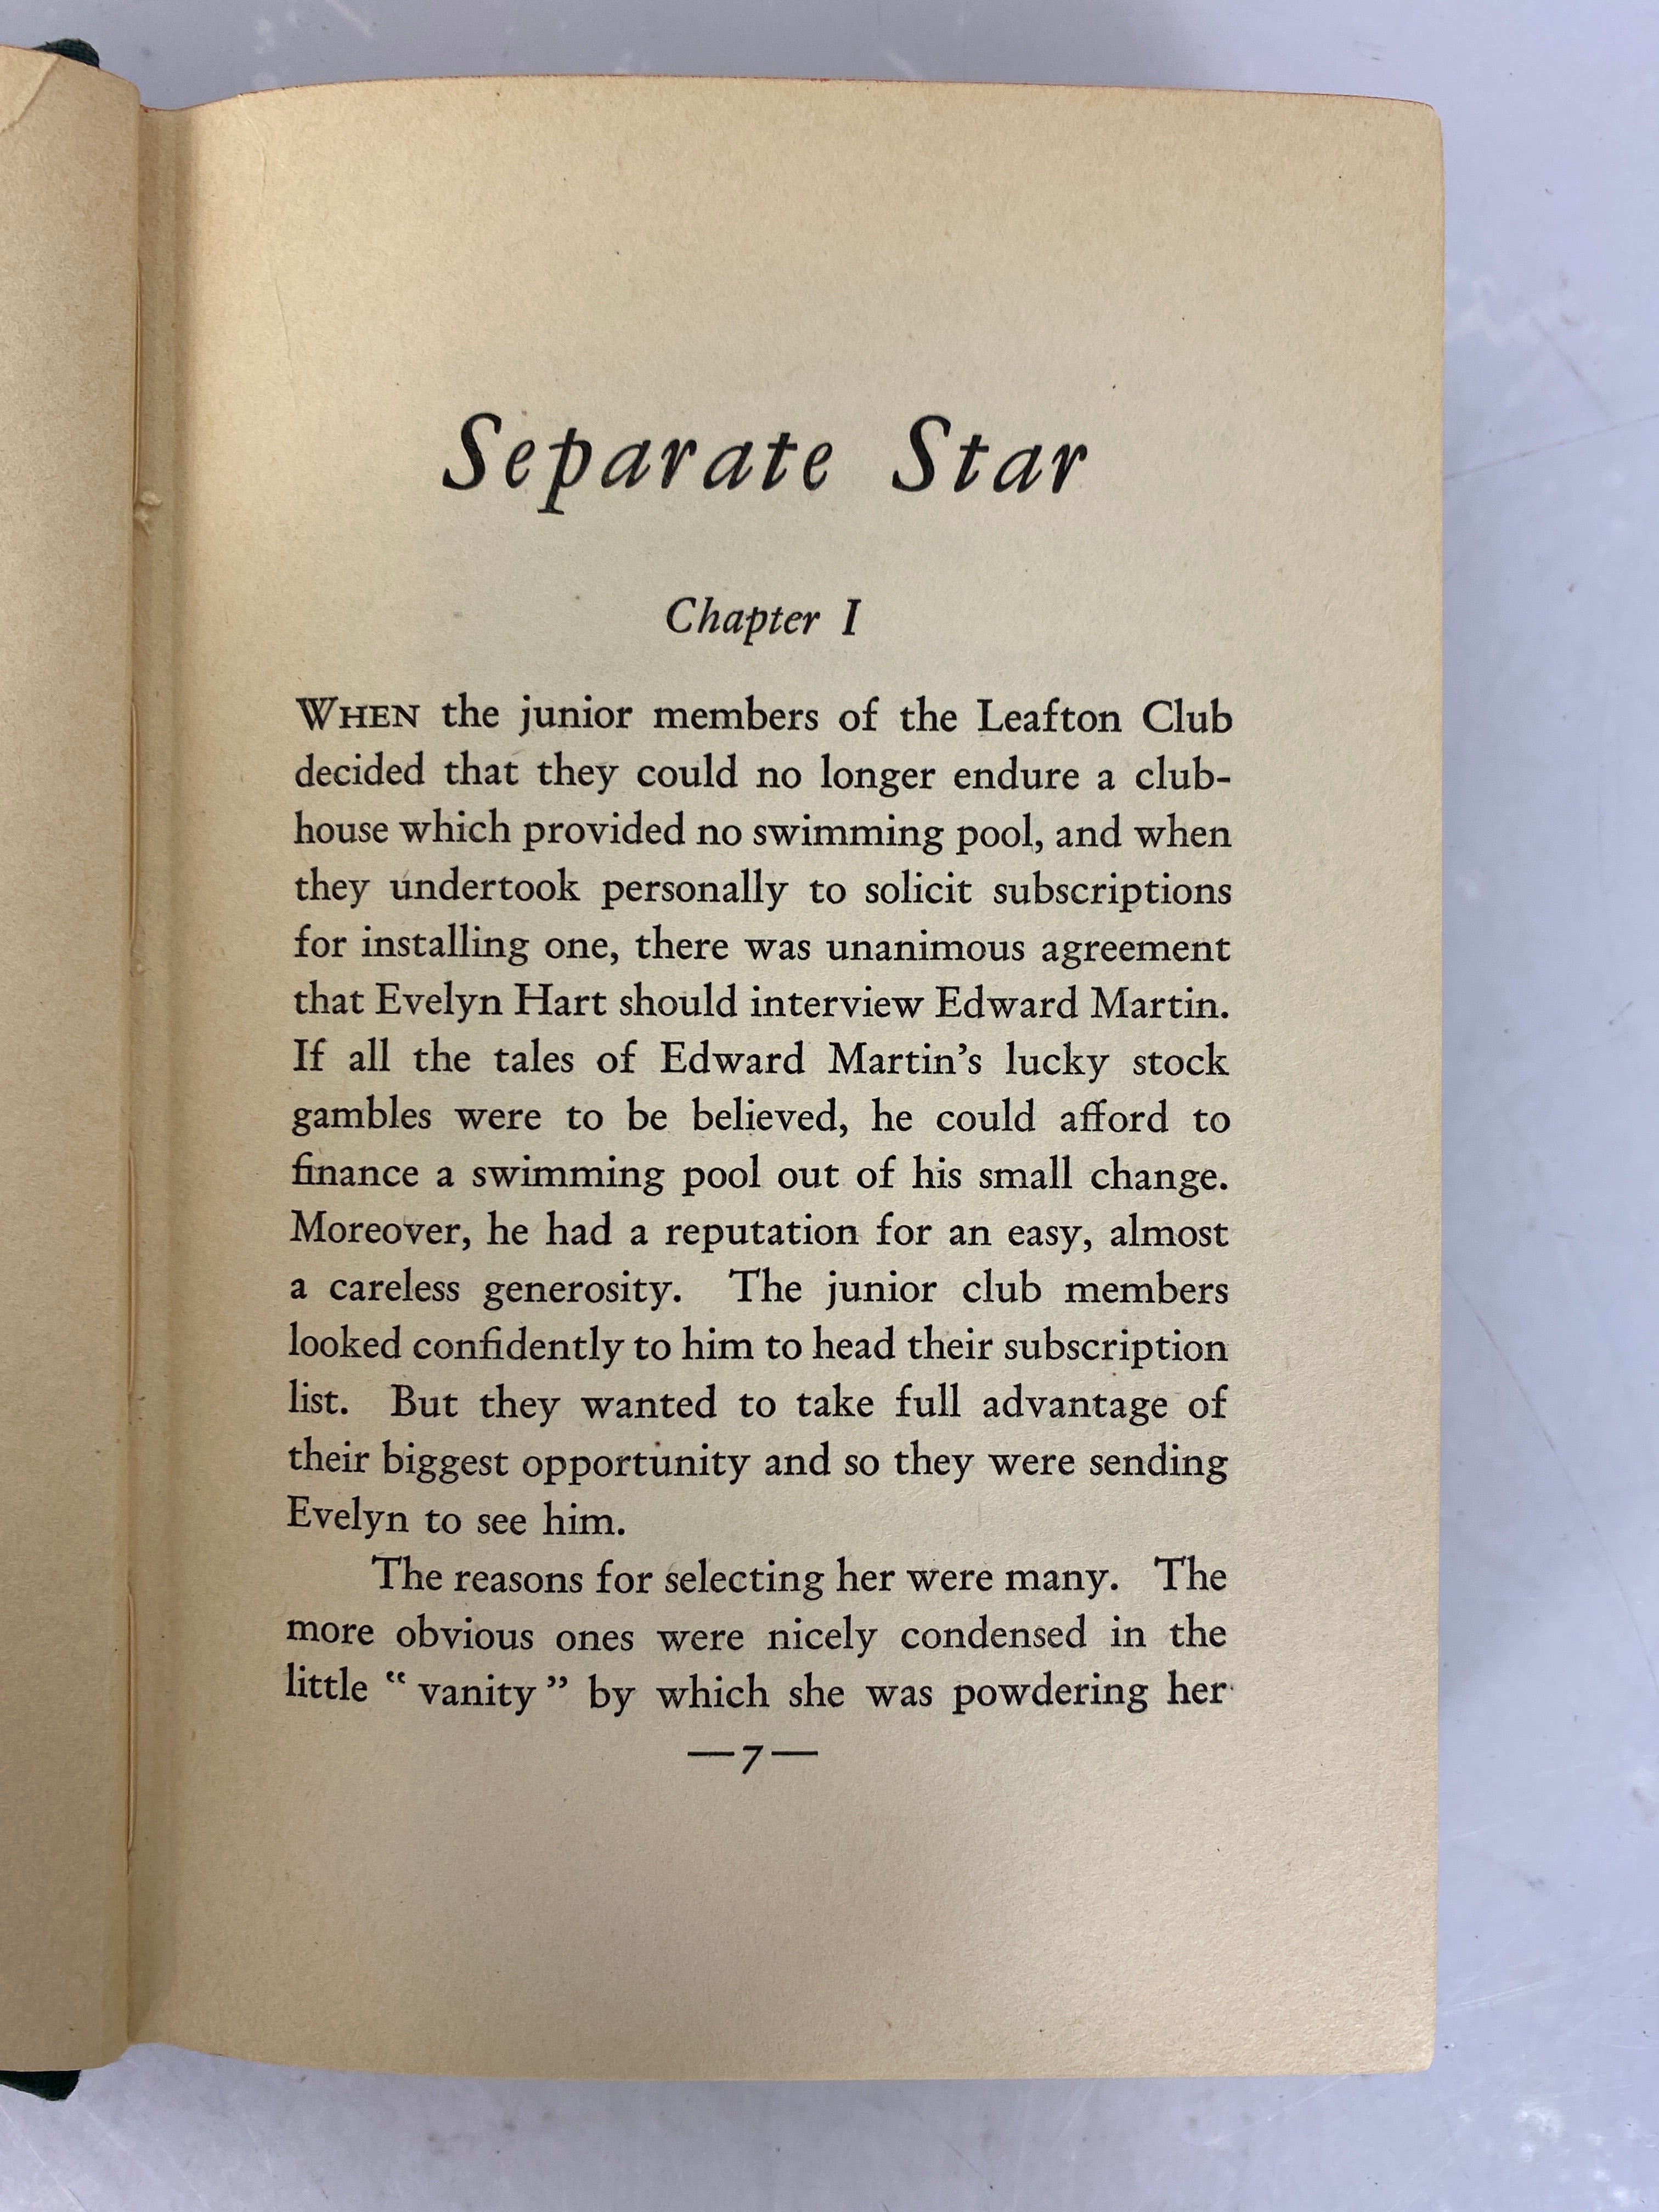 Separate Star by Mary Badger Wilson 1932 HC